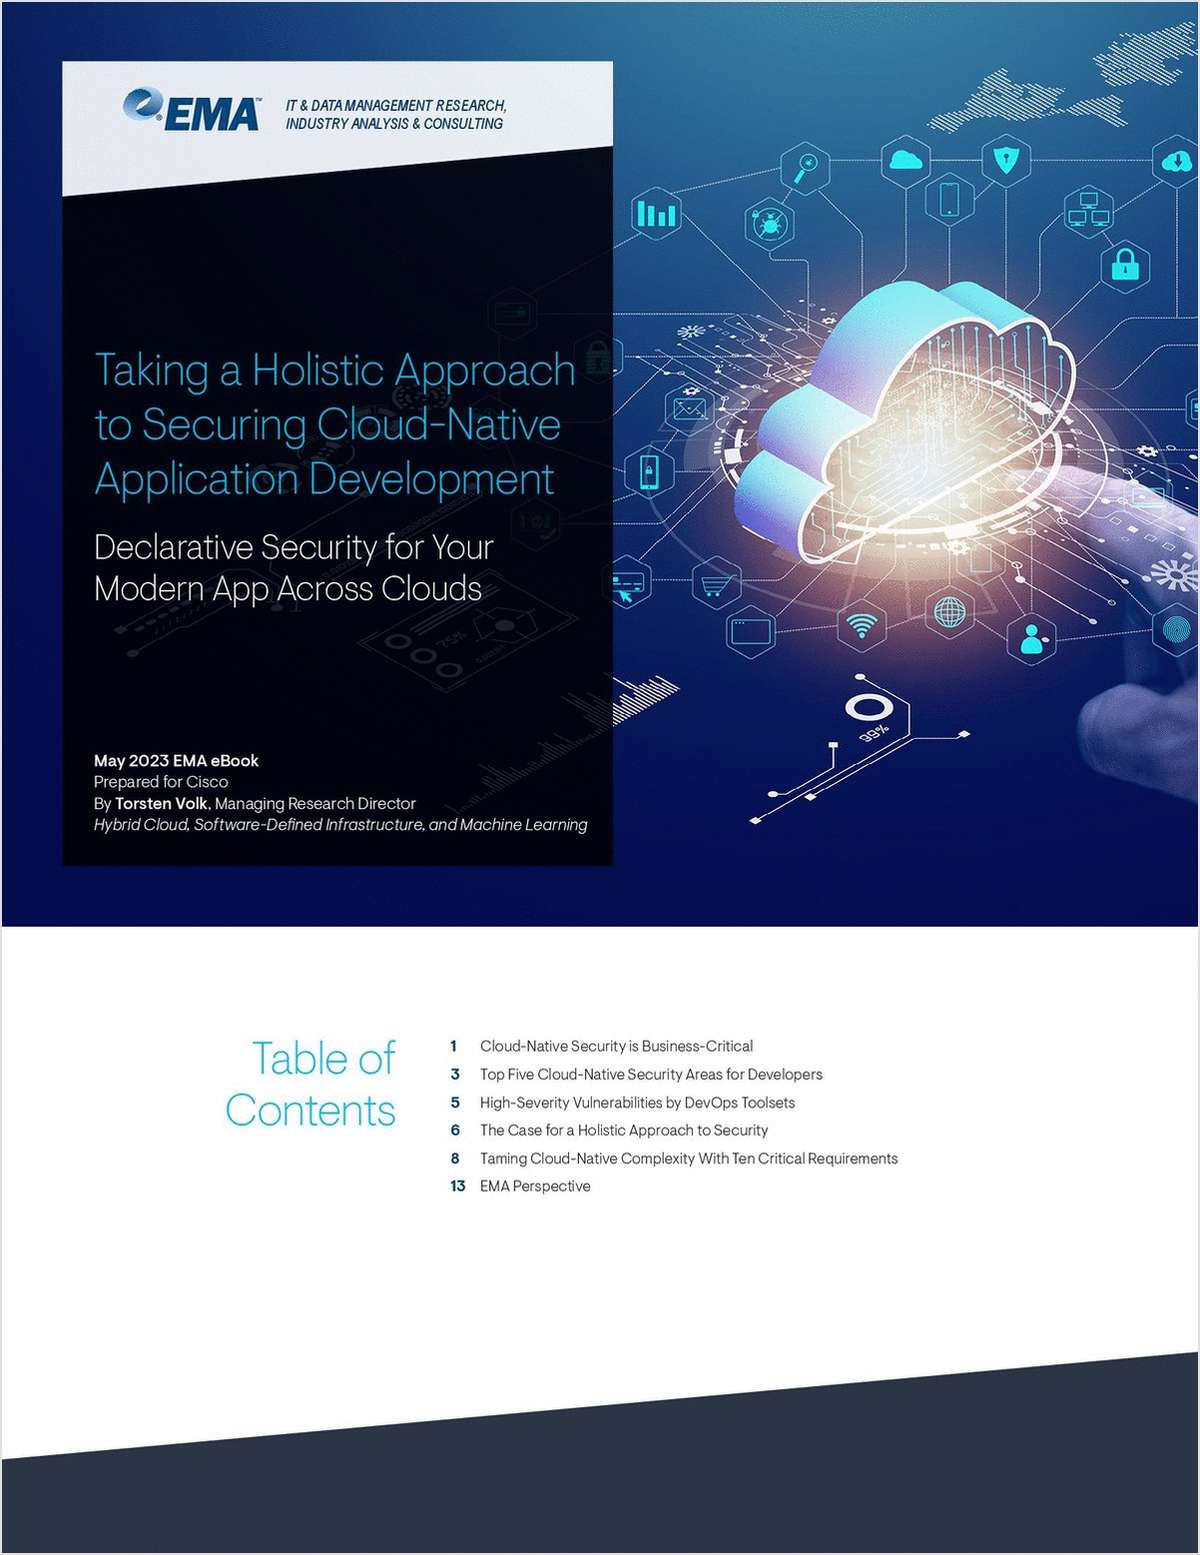 ESG : Taking a Holistic Approach to Securing Cloud-Native Application Development